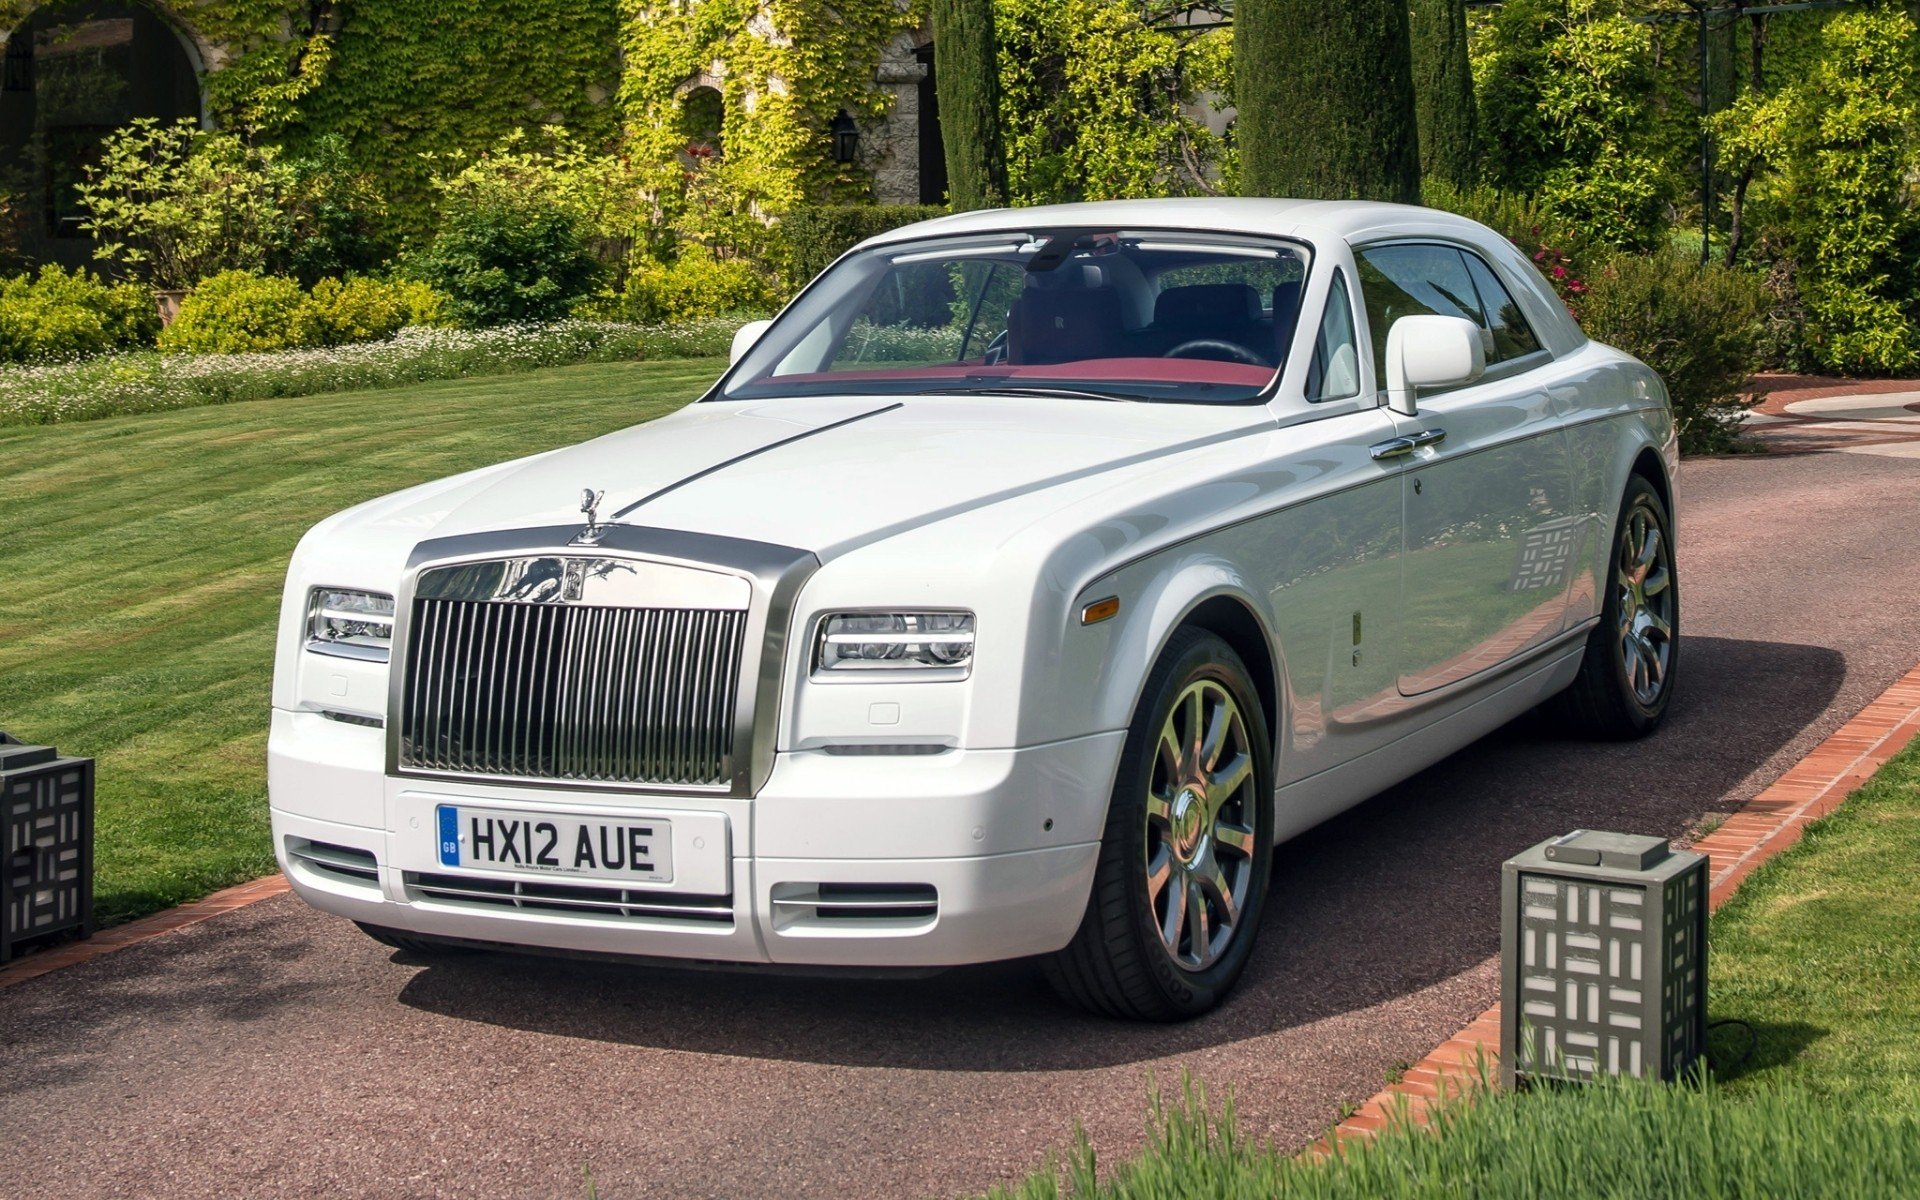 Rolls Royce Car Hd Wallpapers For Mobile